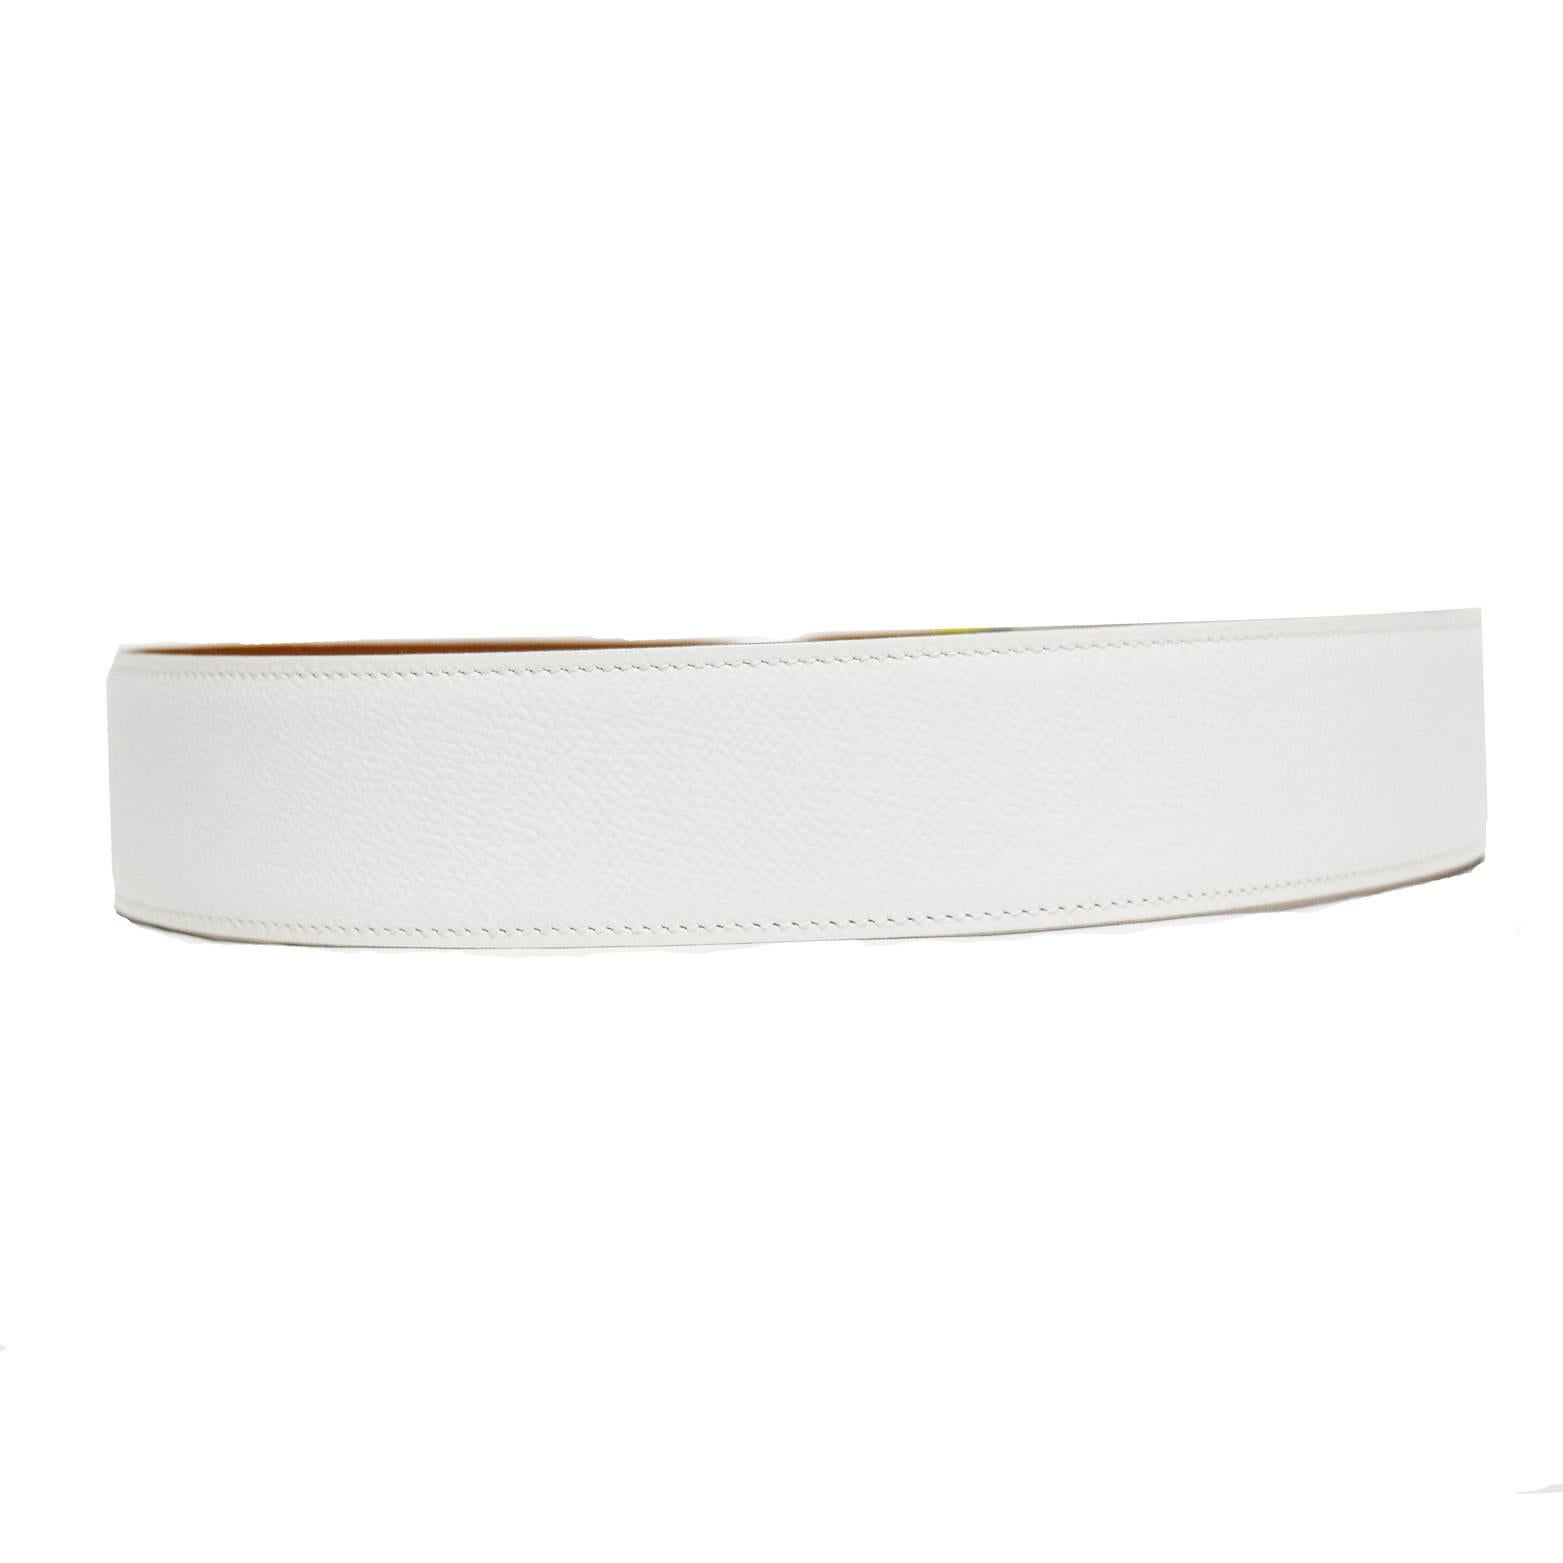 This Hermes Classic has a white leather belt base and a removable interchangeable silk yellow, green, white, and blue twilly with white printed stich details and the Hermes logo printed.